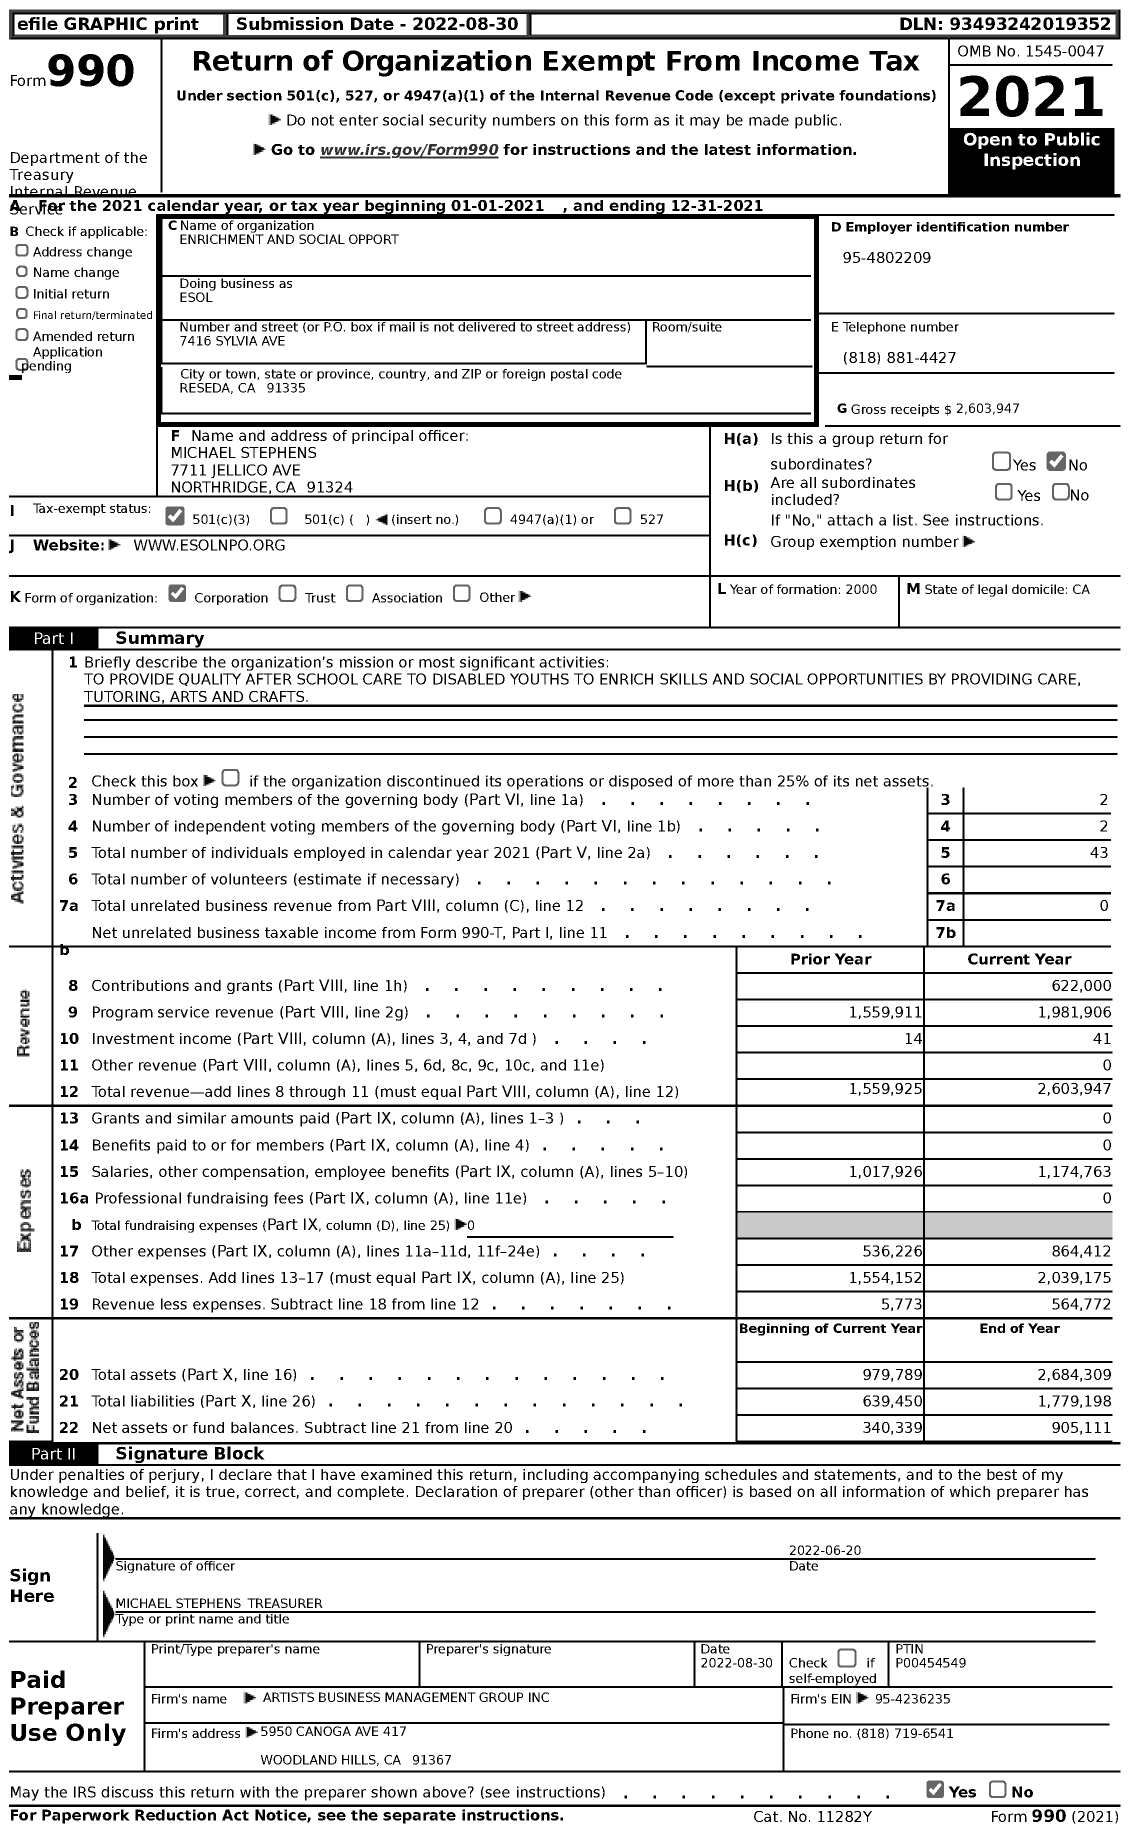 Image of first page of 2021 Form 990 for Enrichment and Social Opport (ESOL)